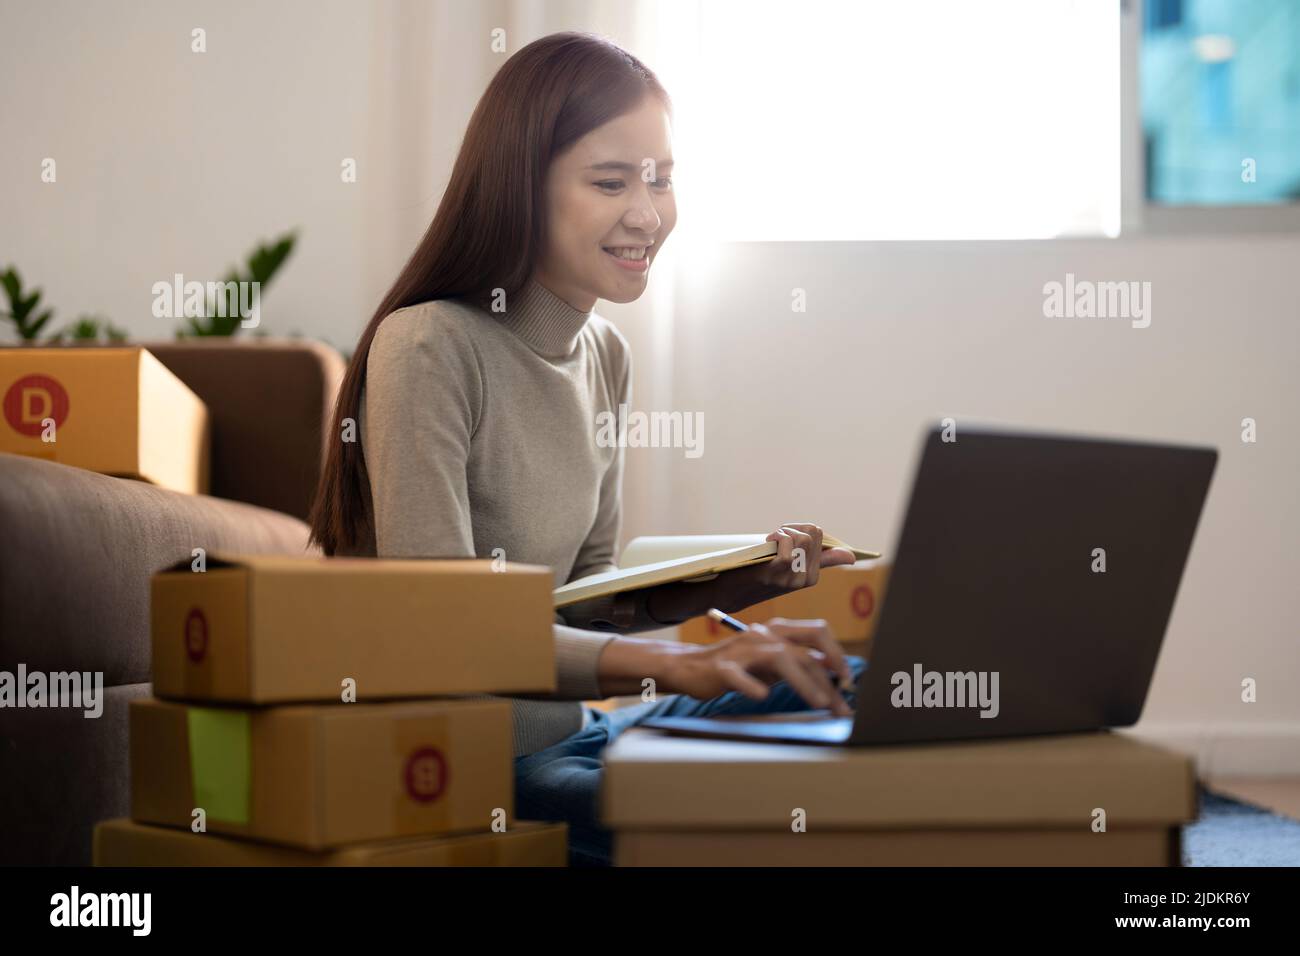 Asian woman Running Business From Home. Shipping shopping online, young start up small business owner packing cardboard box at workplace. Online Stock Photo